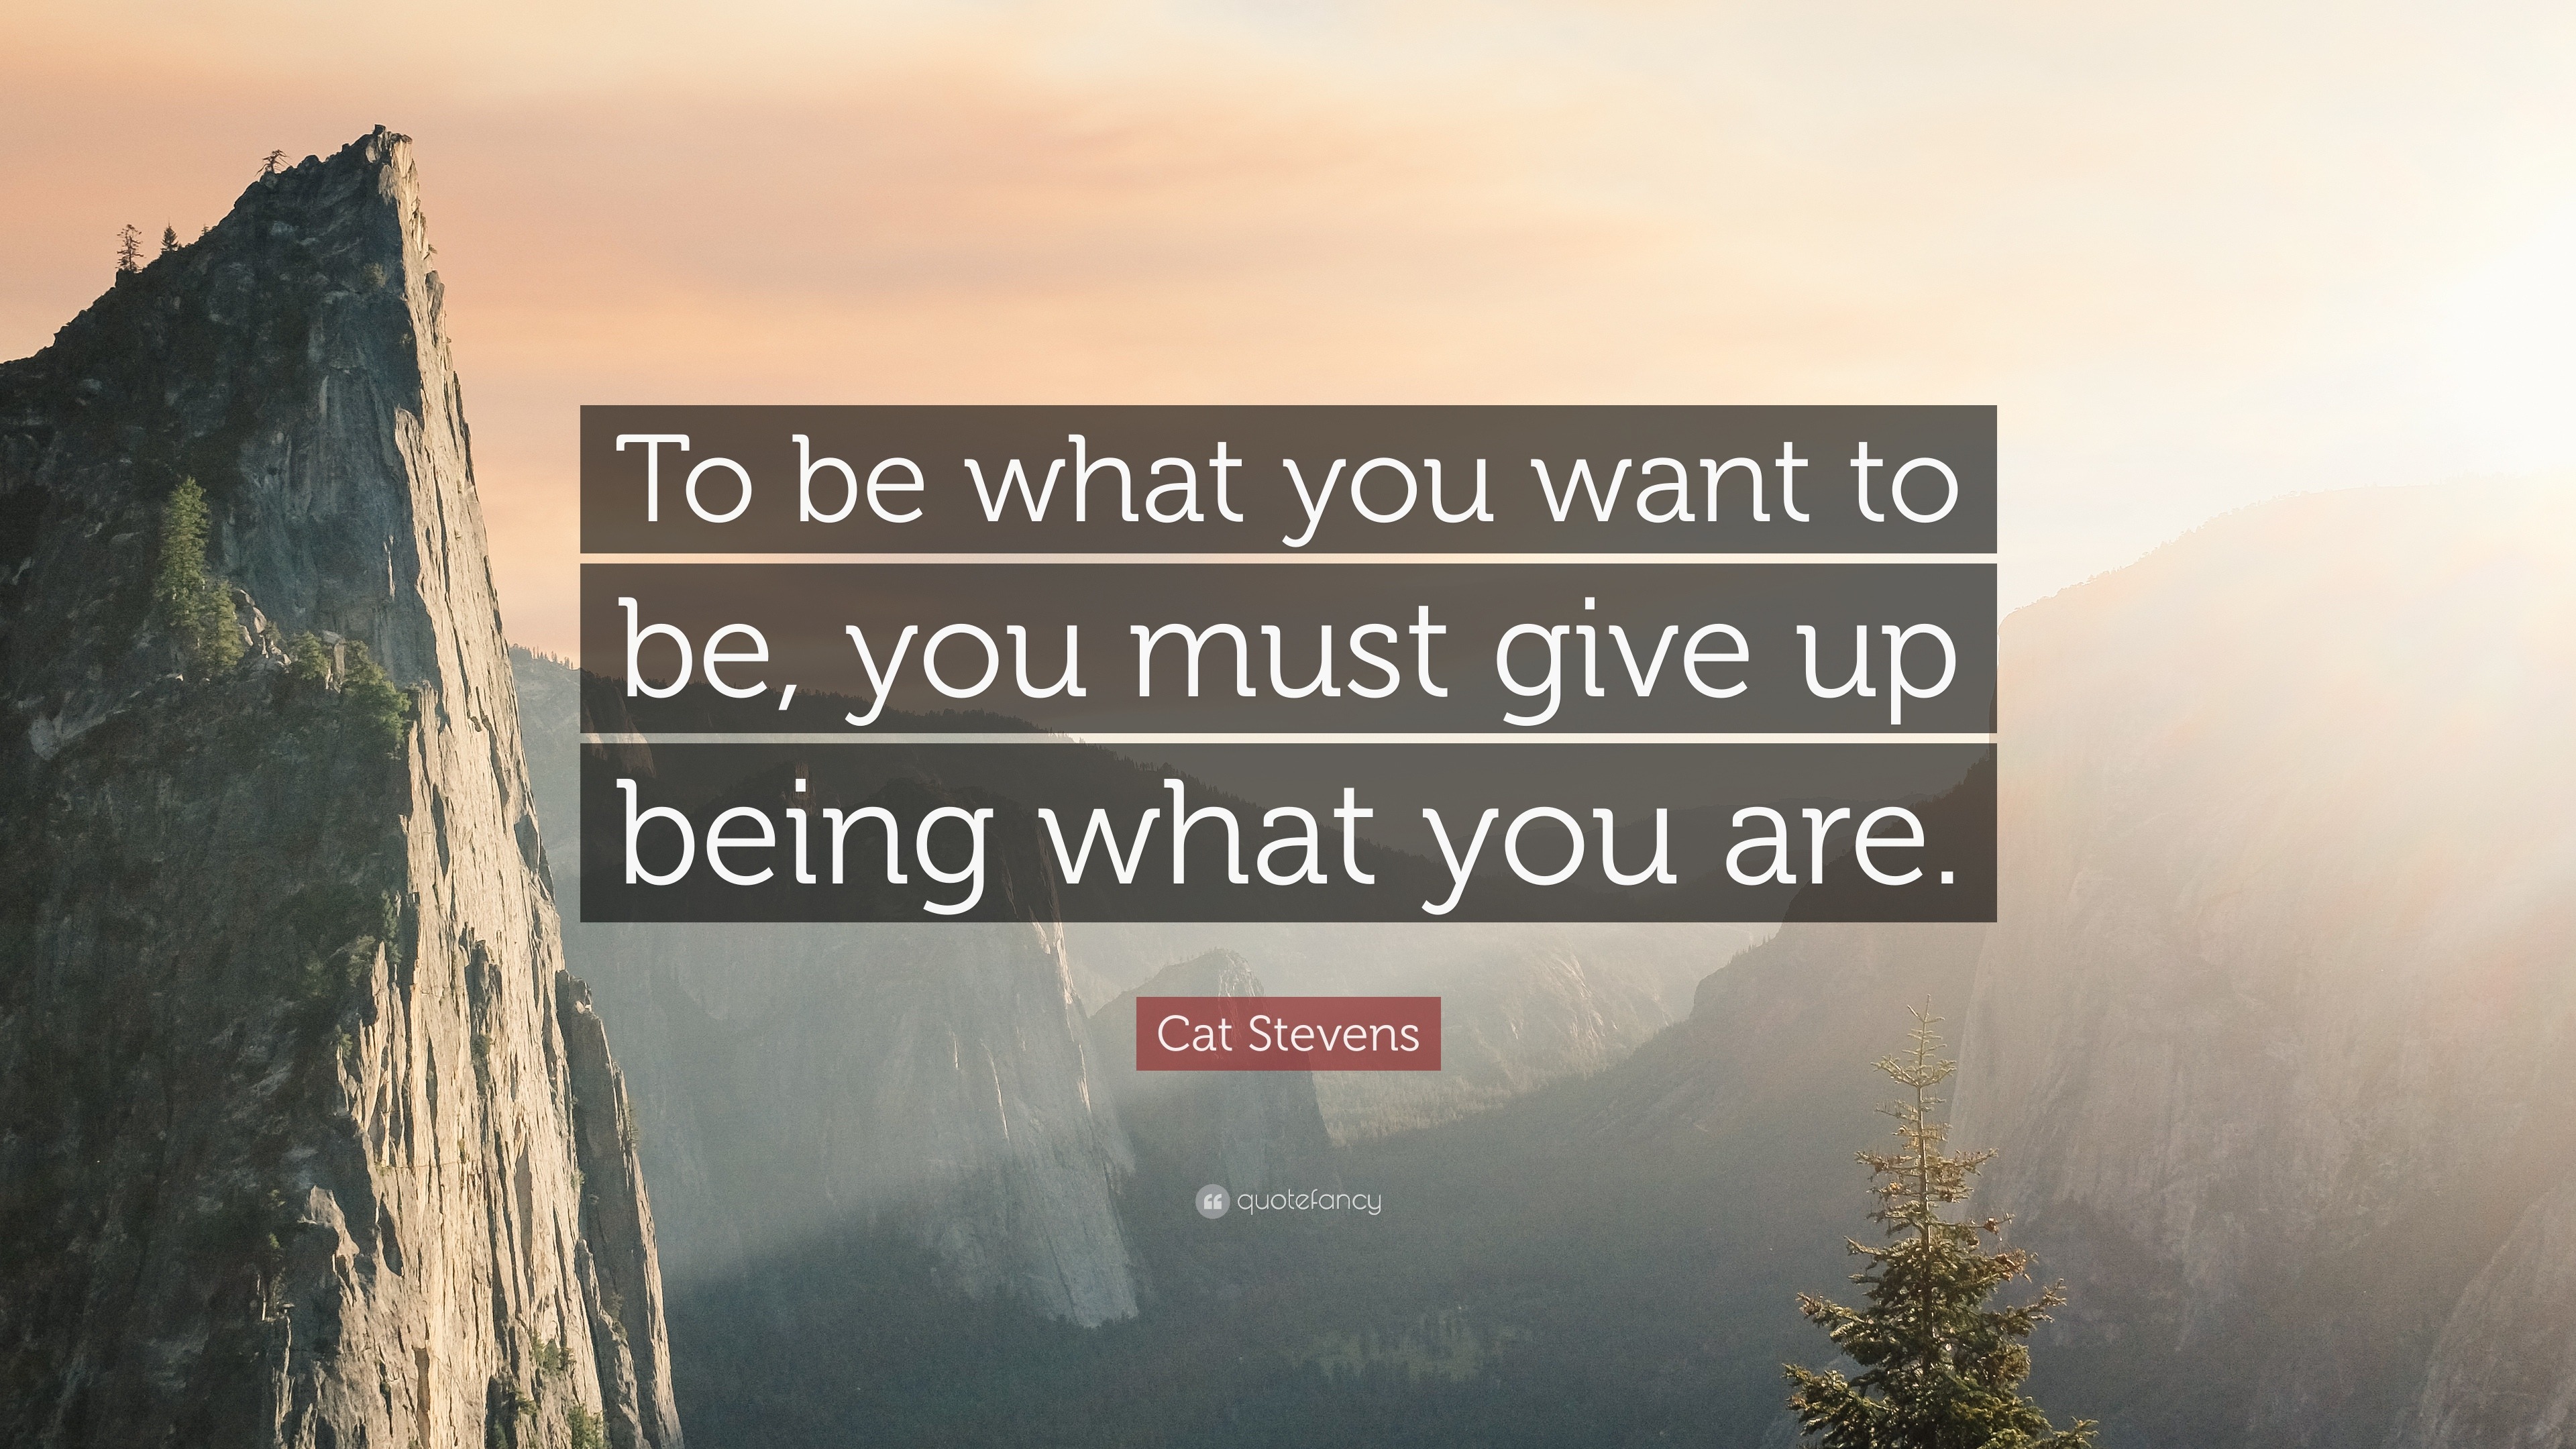 Cat Stevens Quote To Be What You Want To Be You Must Give Up Being What You Are 7 Wallpapers Quotefancy